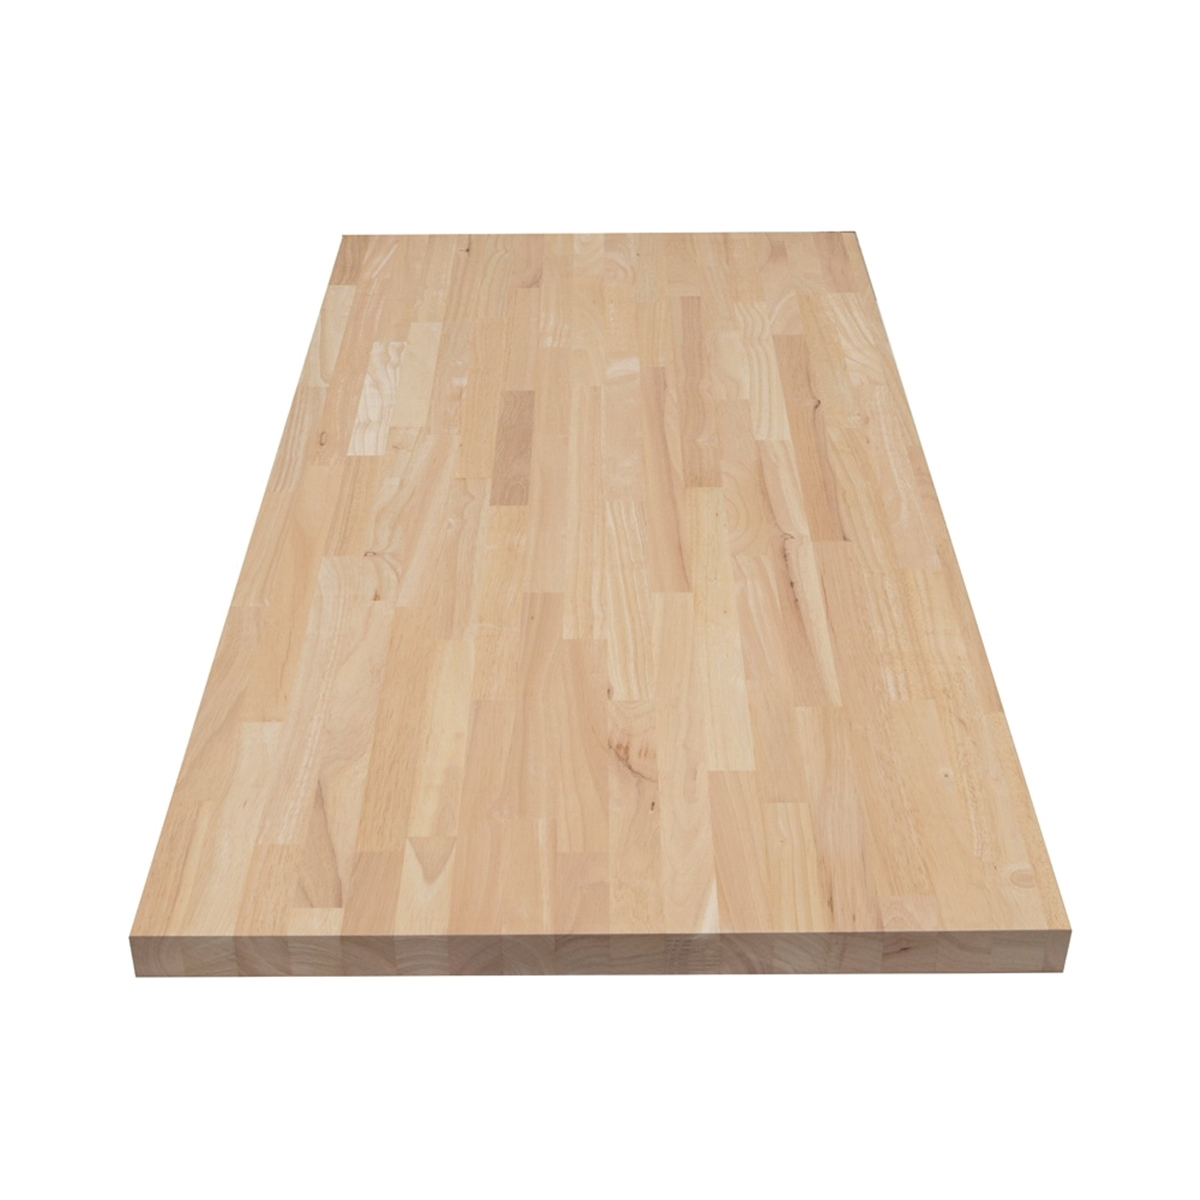 CenterPointe Series RW0498CP Butcher Block Top, 98 in L, 4 in D, 1-1/2 in Thick, Wood, Unfinished